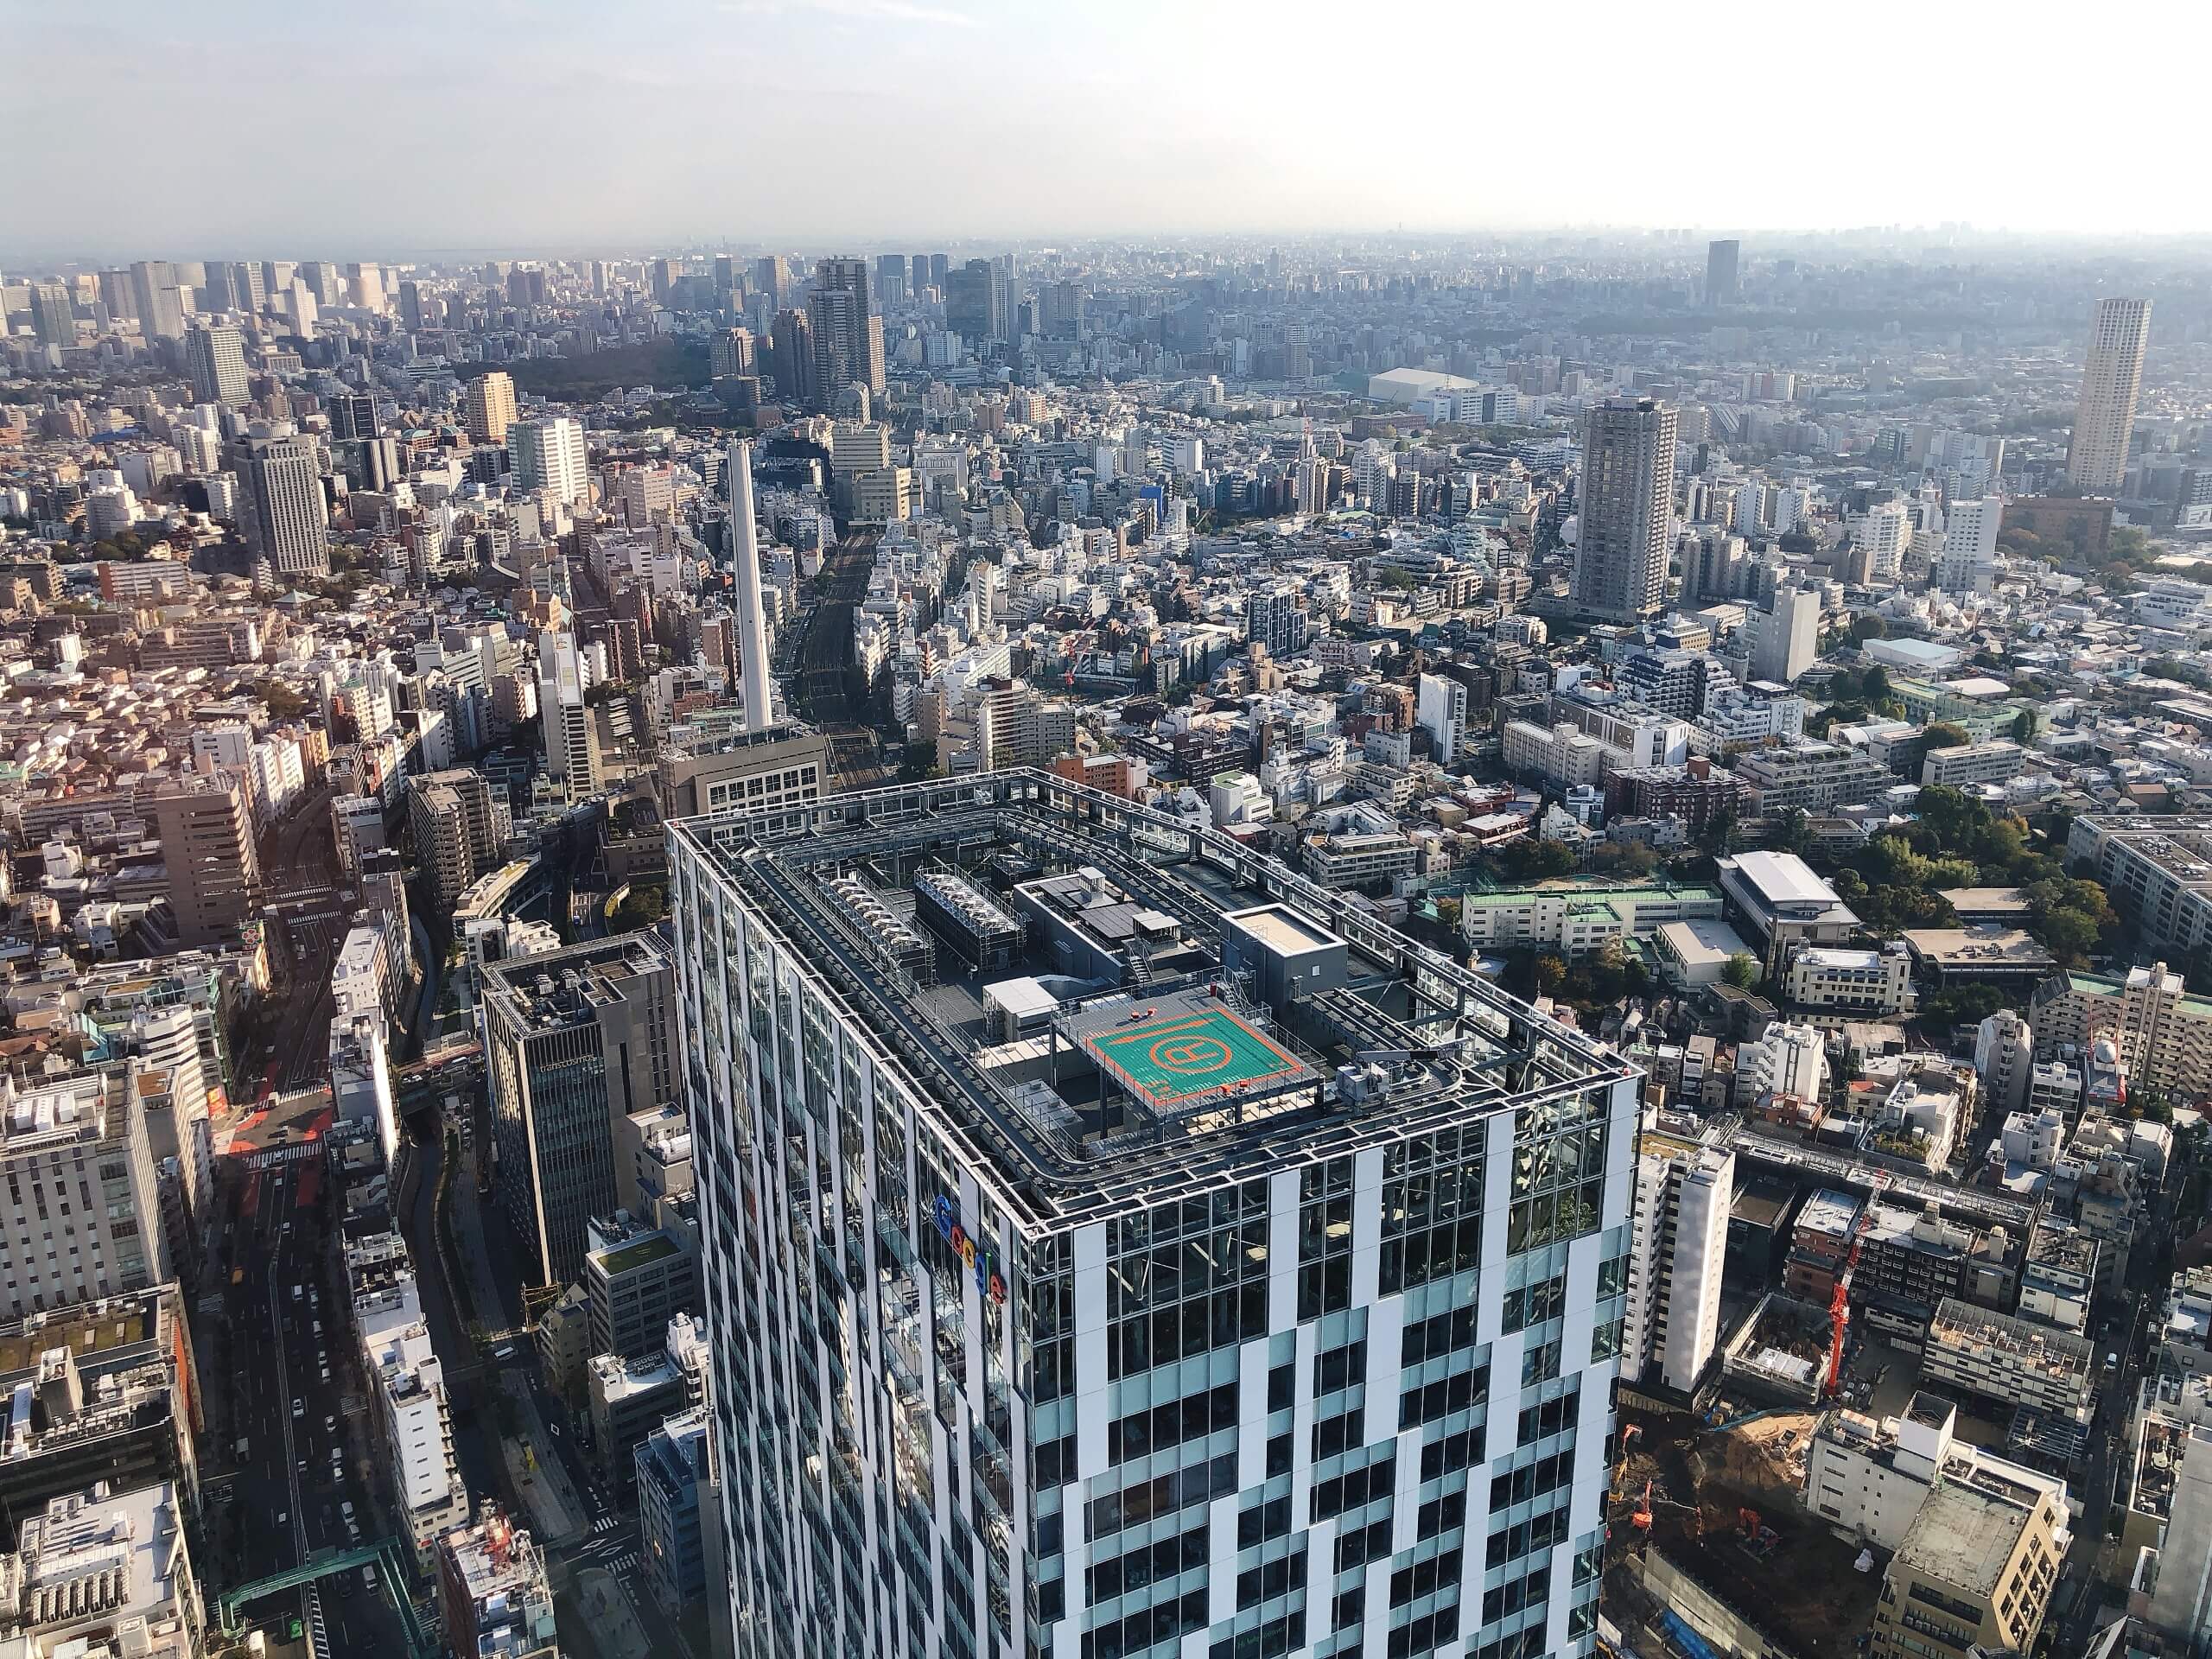 The view of the town in Shibuya